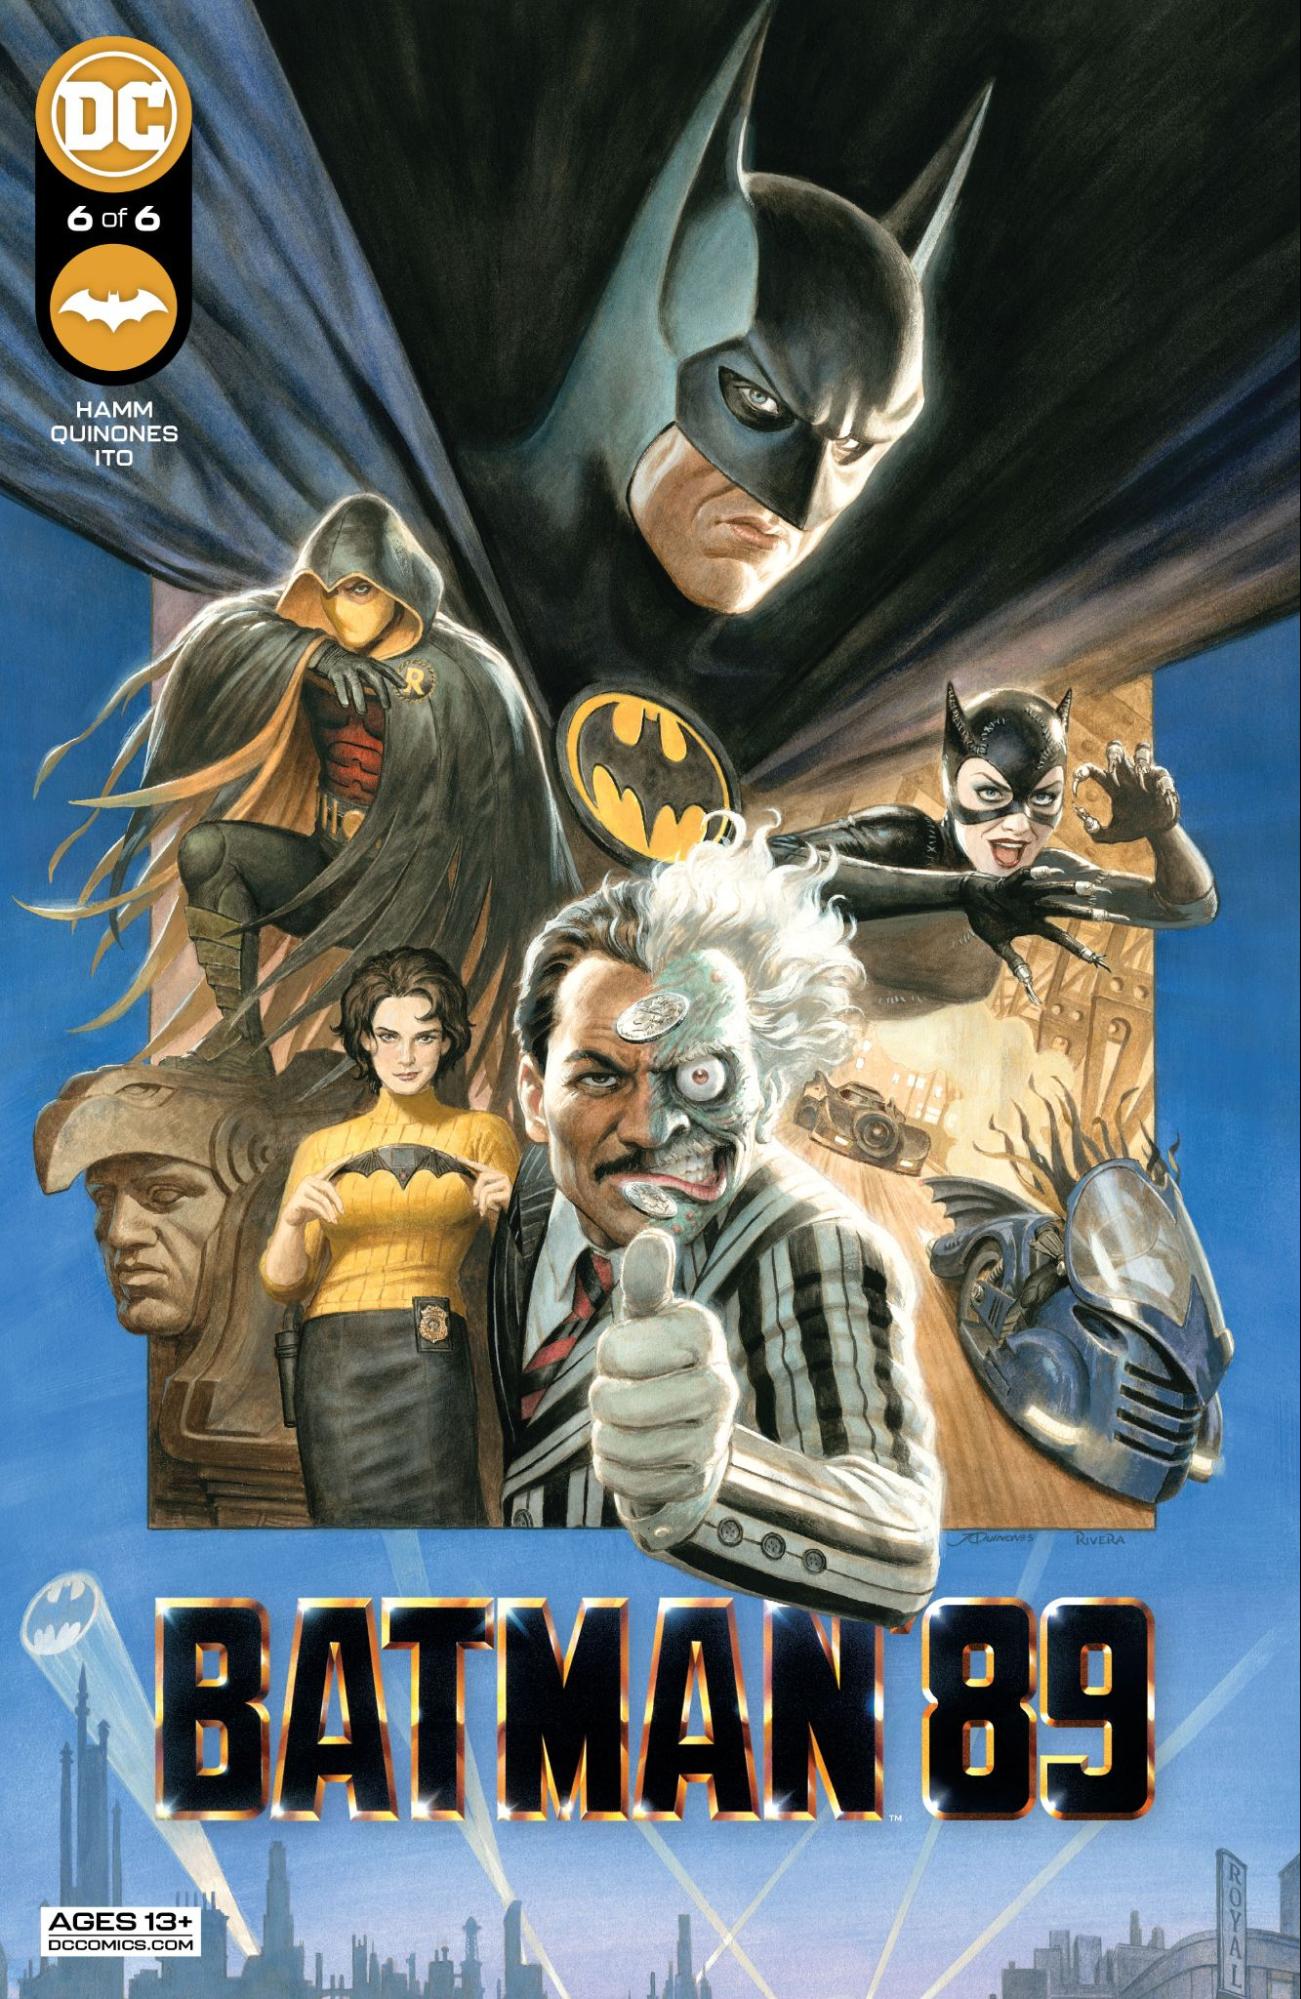 Cover of Batman 89 featuring a painted collection of characters